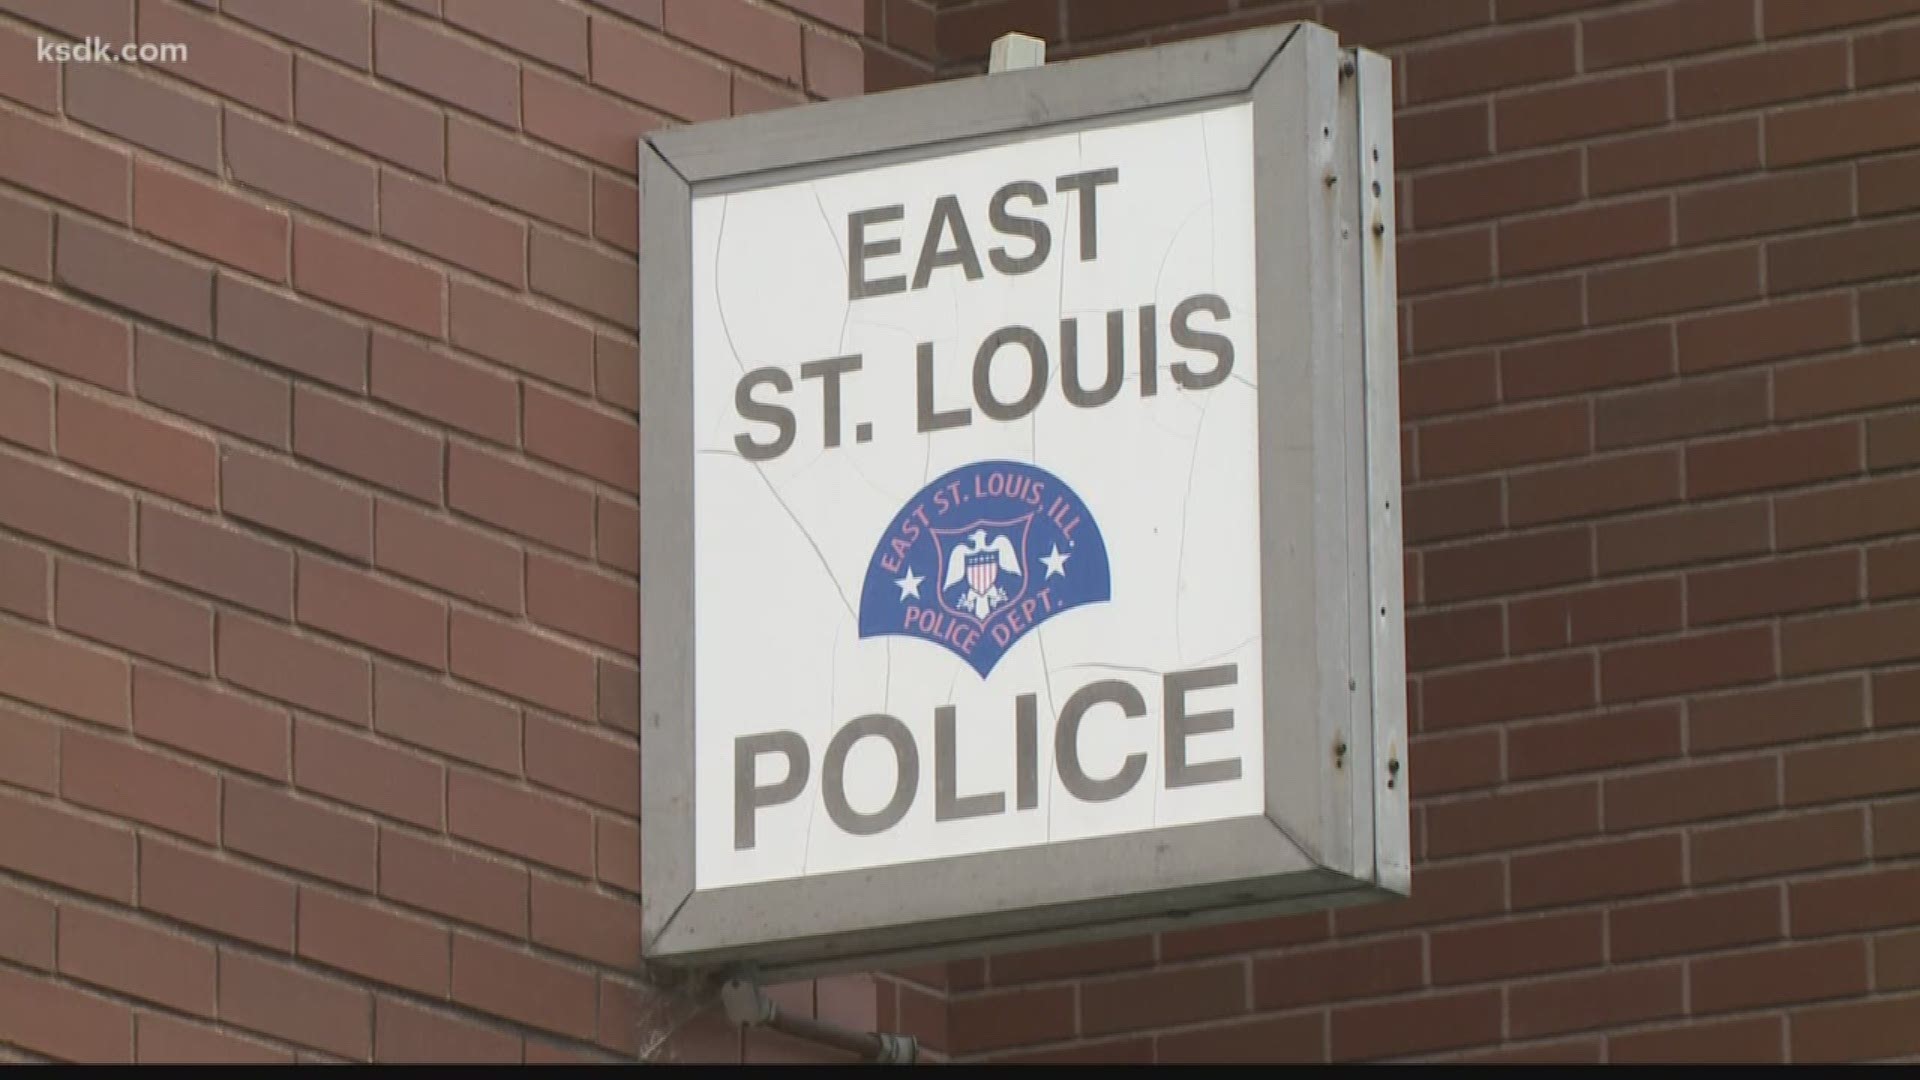 He is supposed to serve his community. Instead, an East St. Louis Police officer is accused of stealing from it.